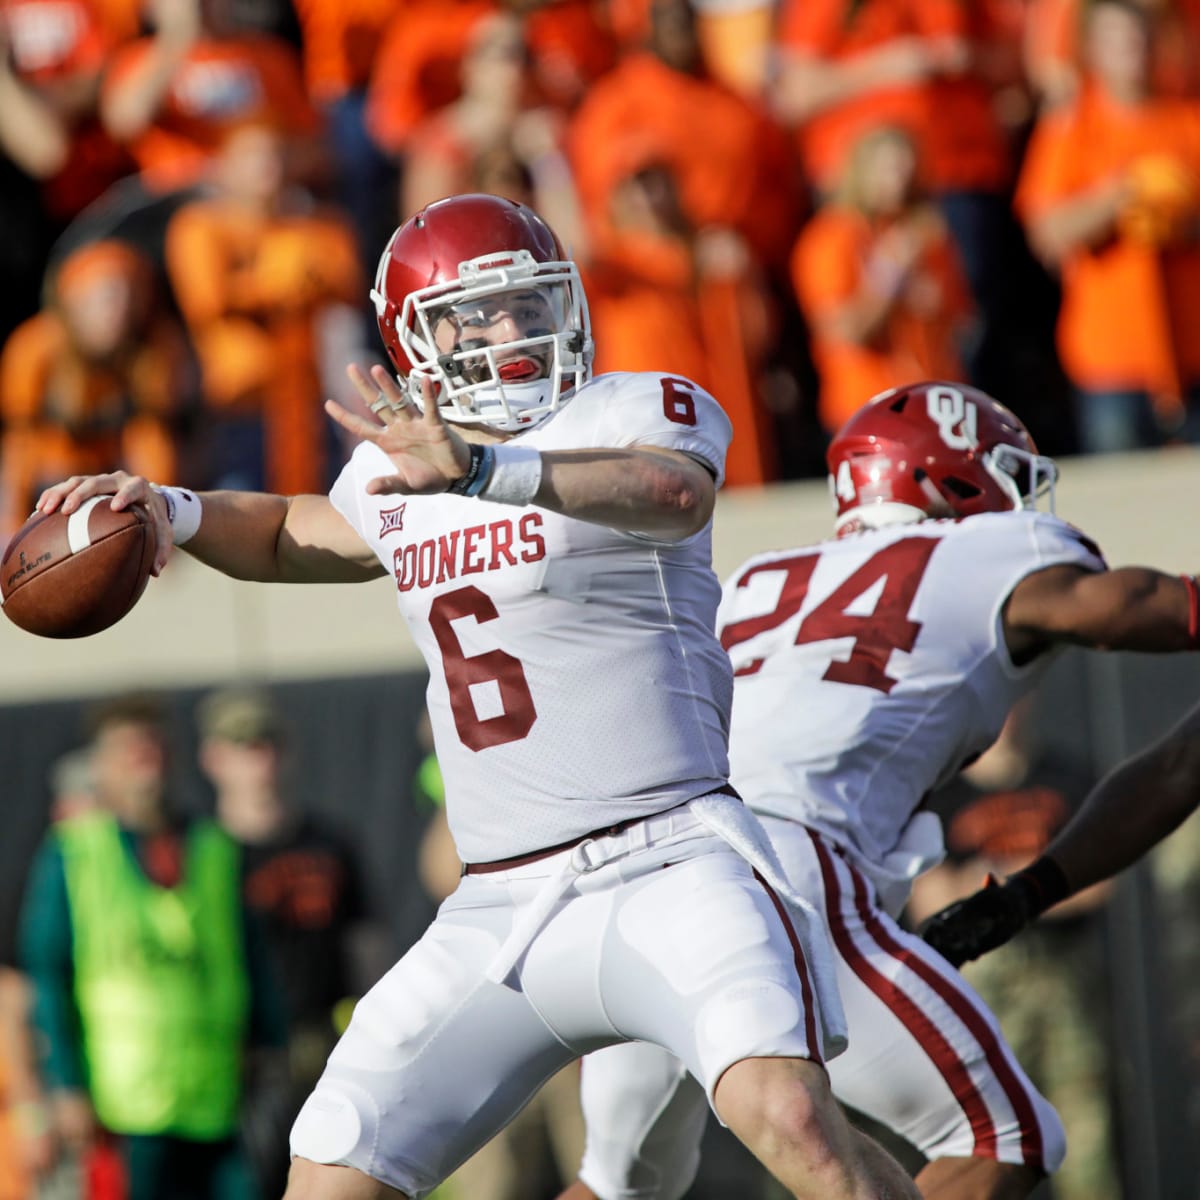 The night Patrick Mahomes vs. Baker Mayfield rewrote college